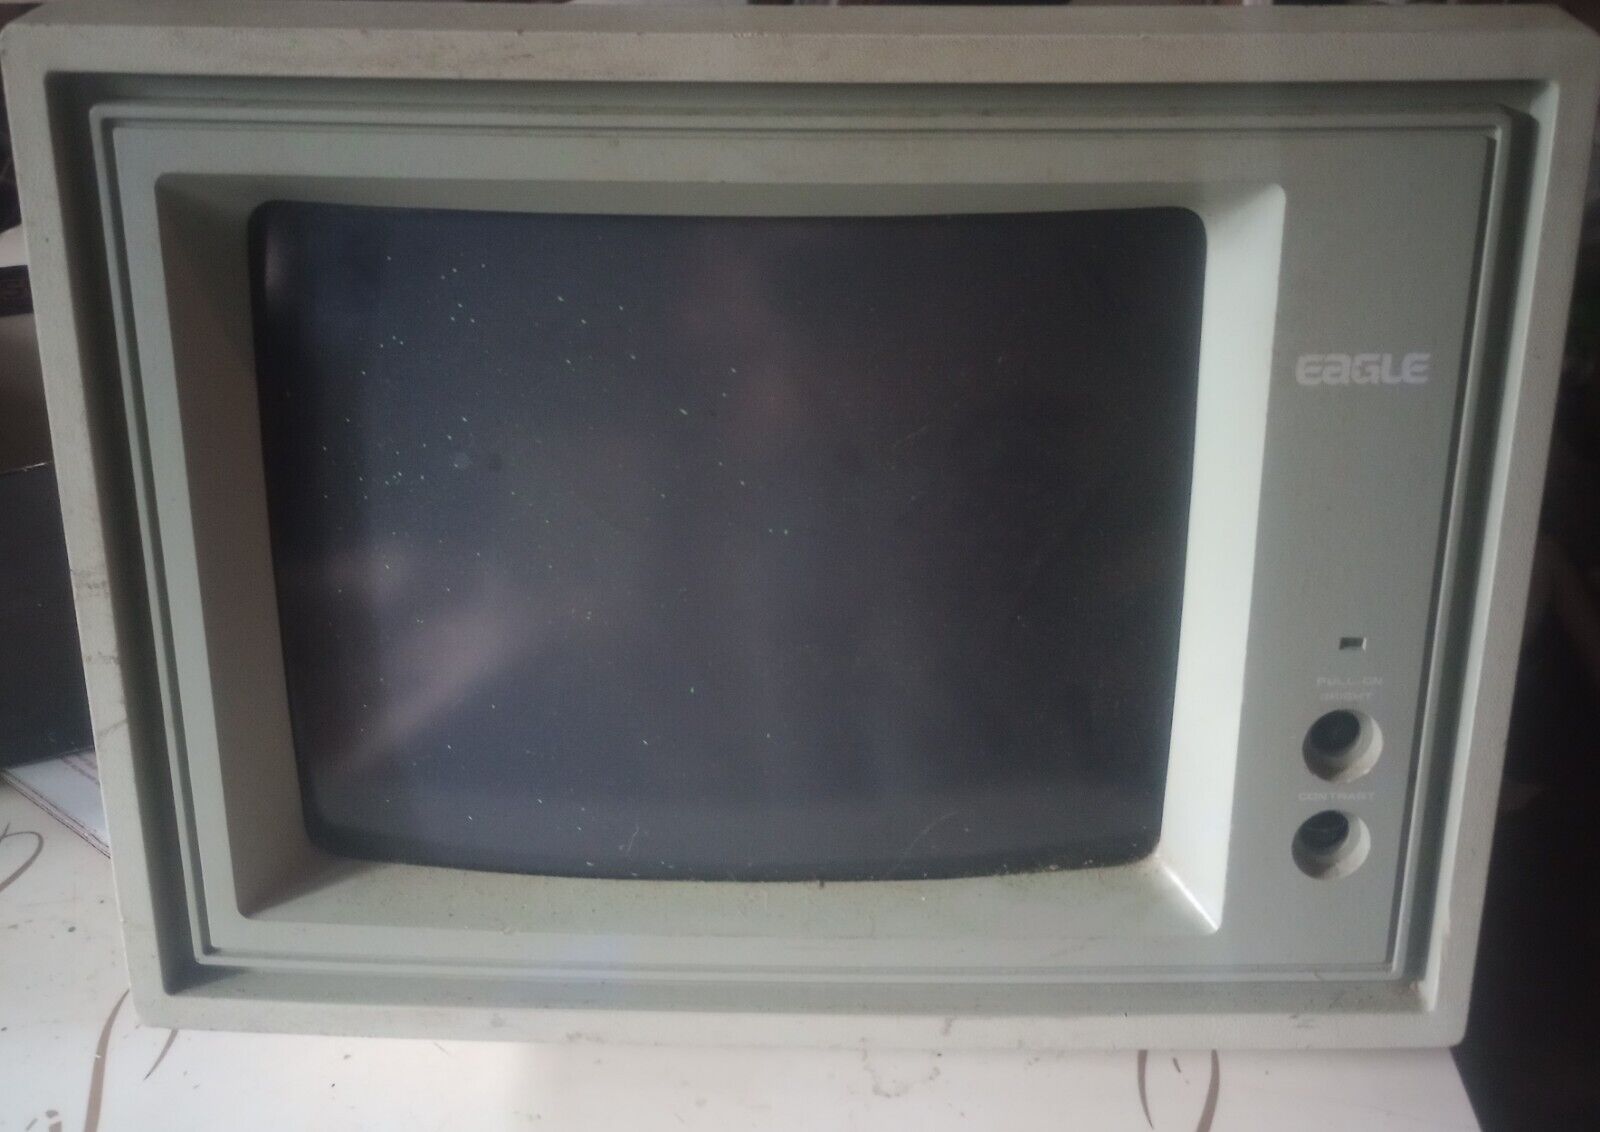 Vintage 1983 Eagle Computer Monitor 11” Screen - Powers On